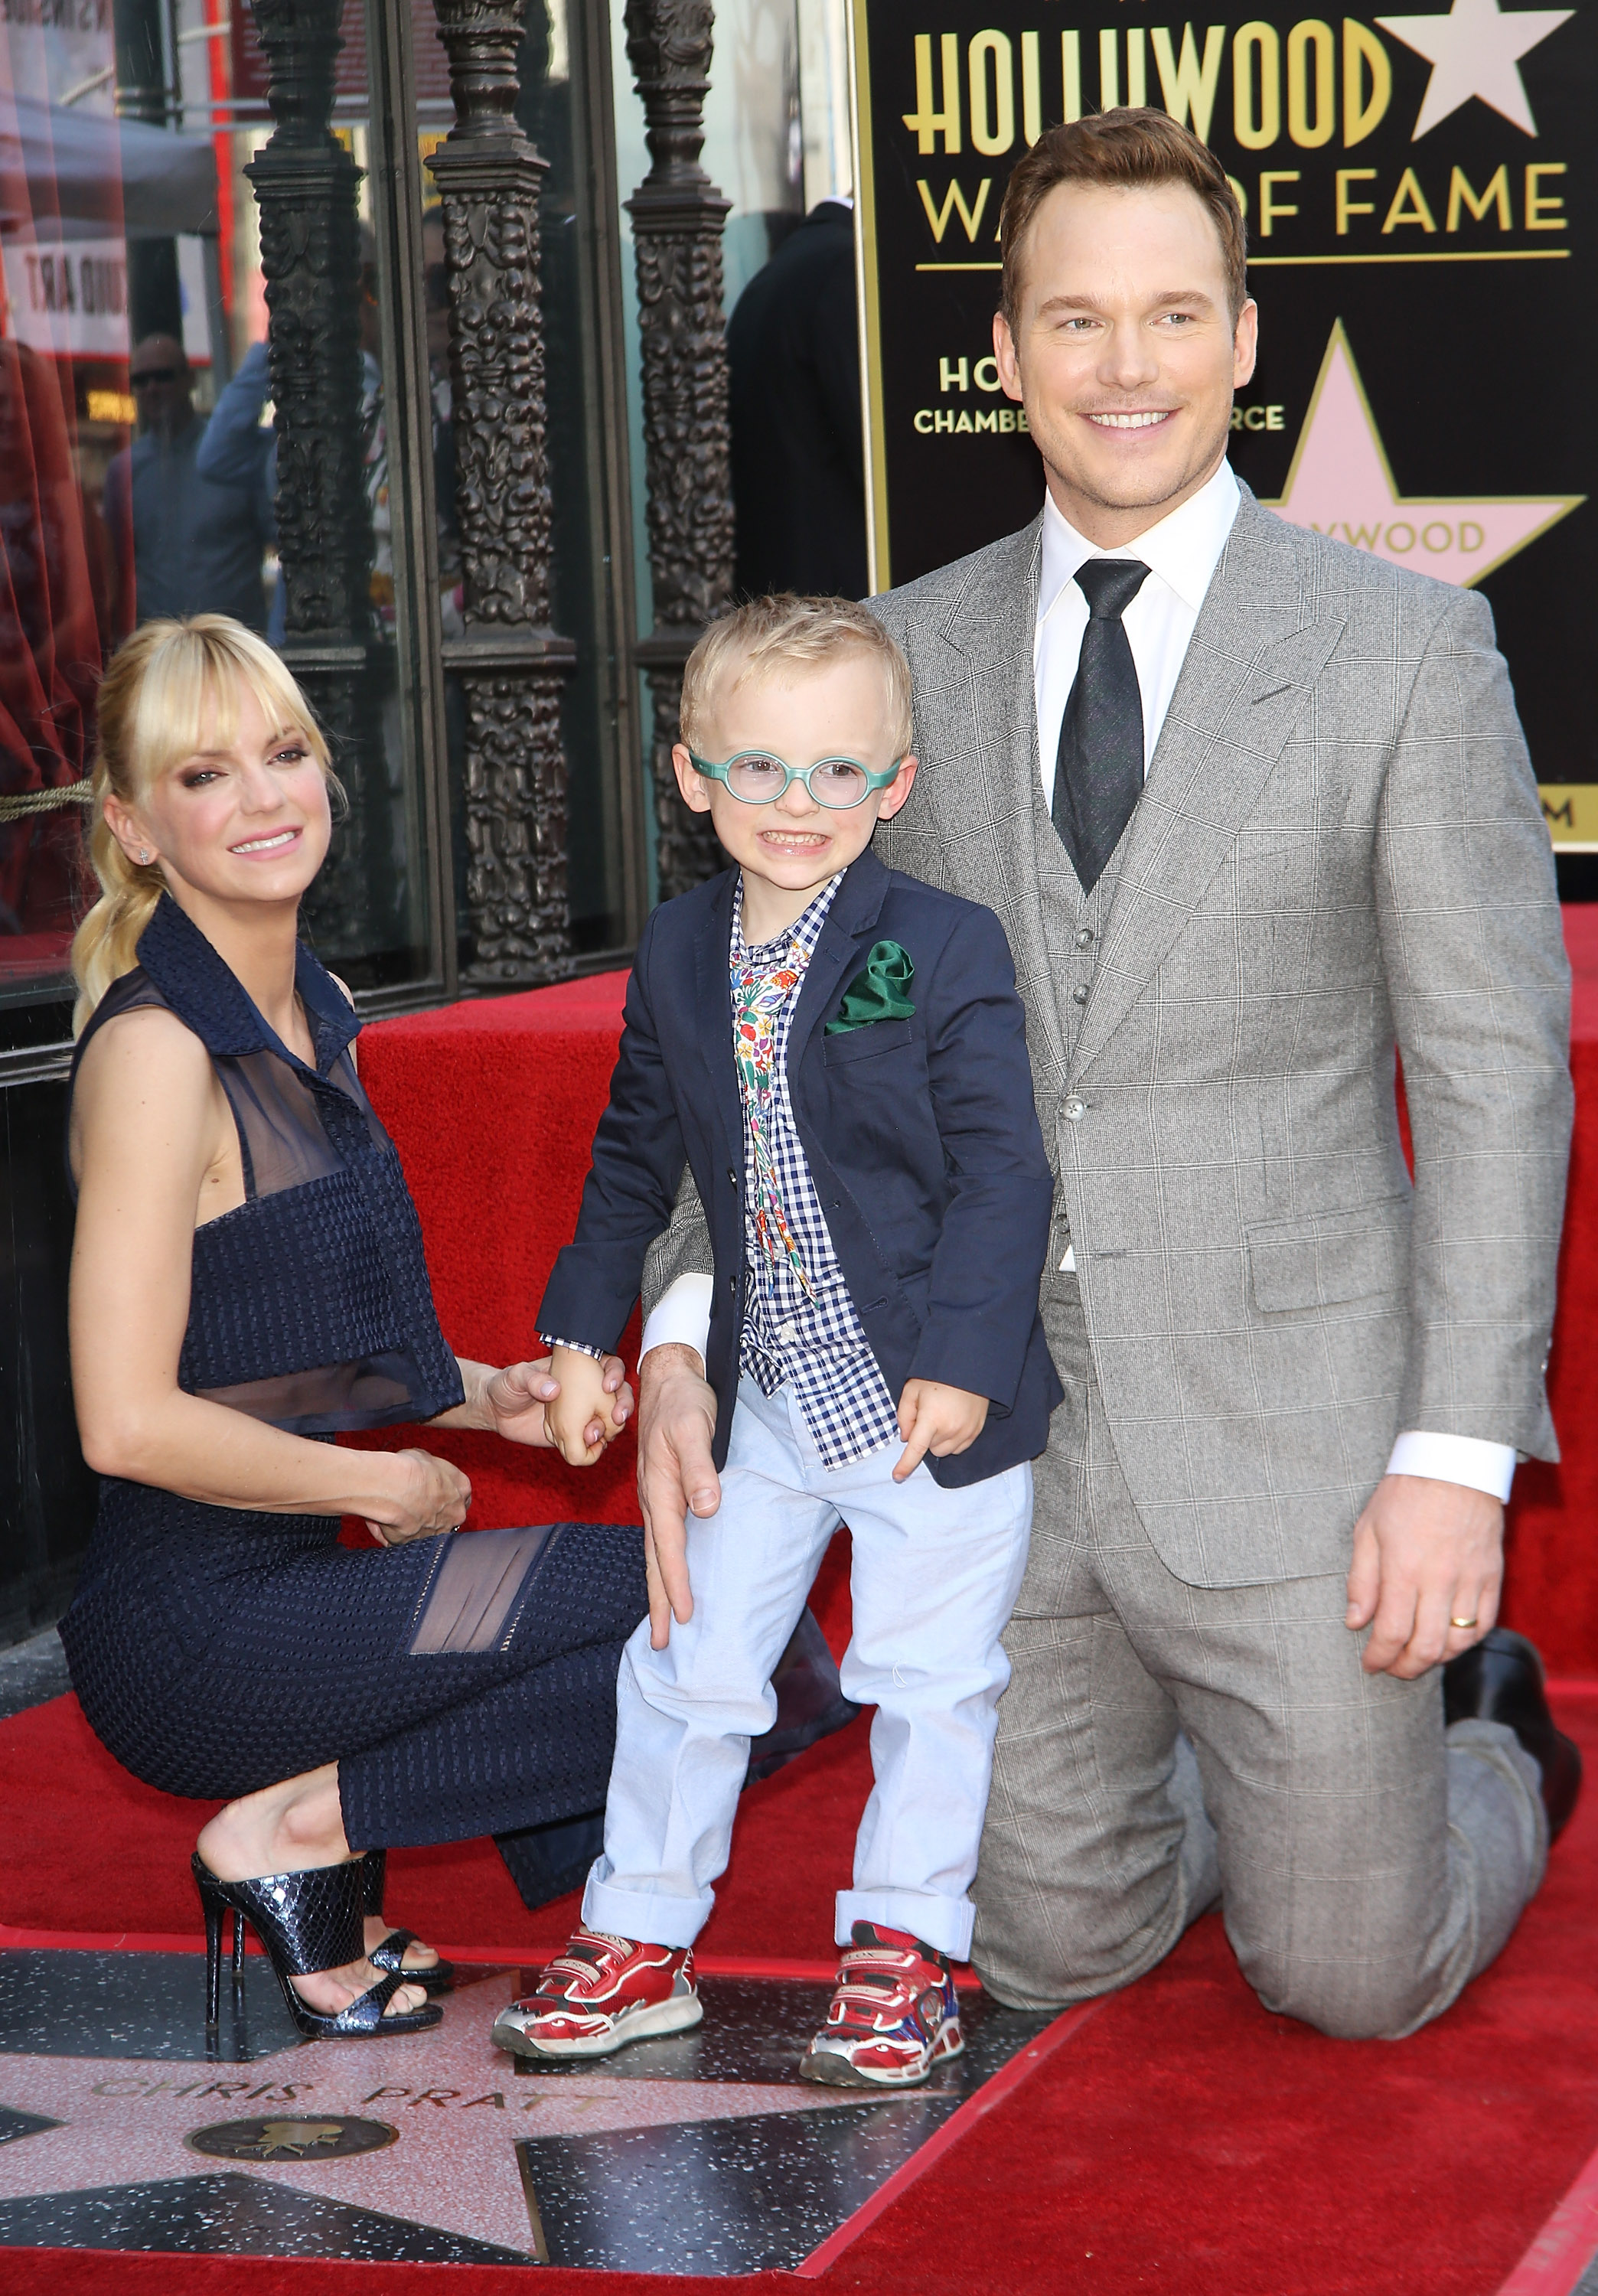 Chris Pratt, Anna Faris, and their son, Jack, at the ceremony honoring Chris Pratt with a star on the Hollywood Walk of Fame on April 21, 2017 in Hollywood, California. | Source: Getty Images